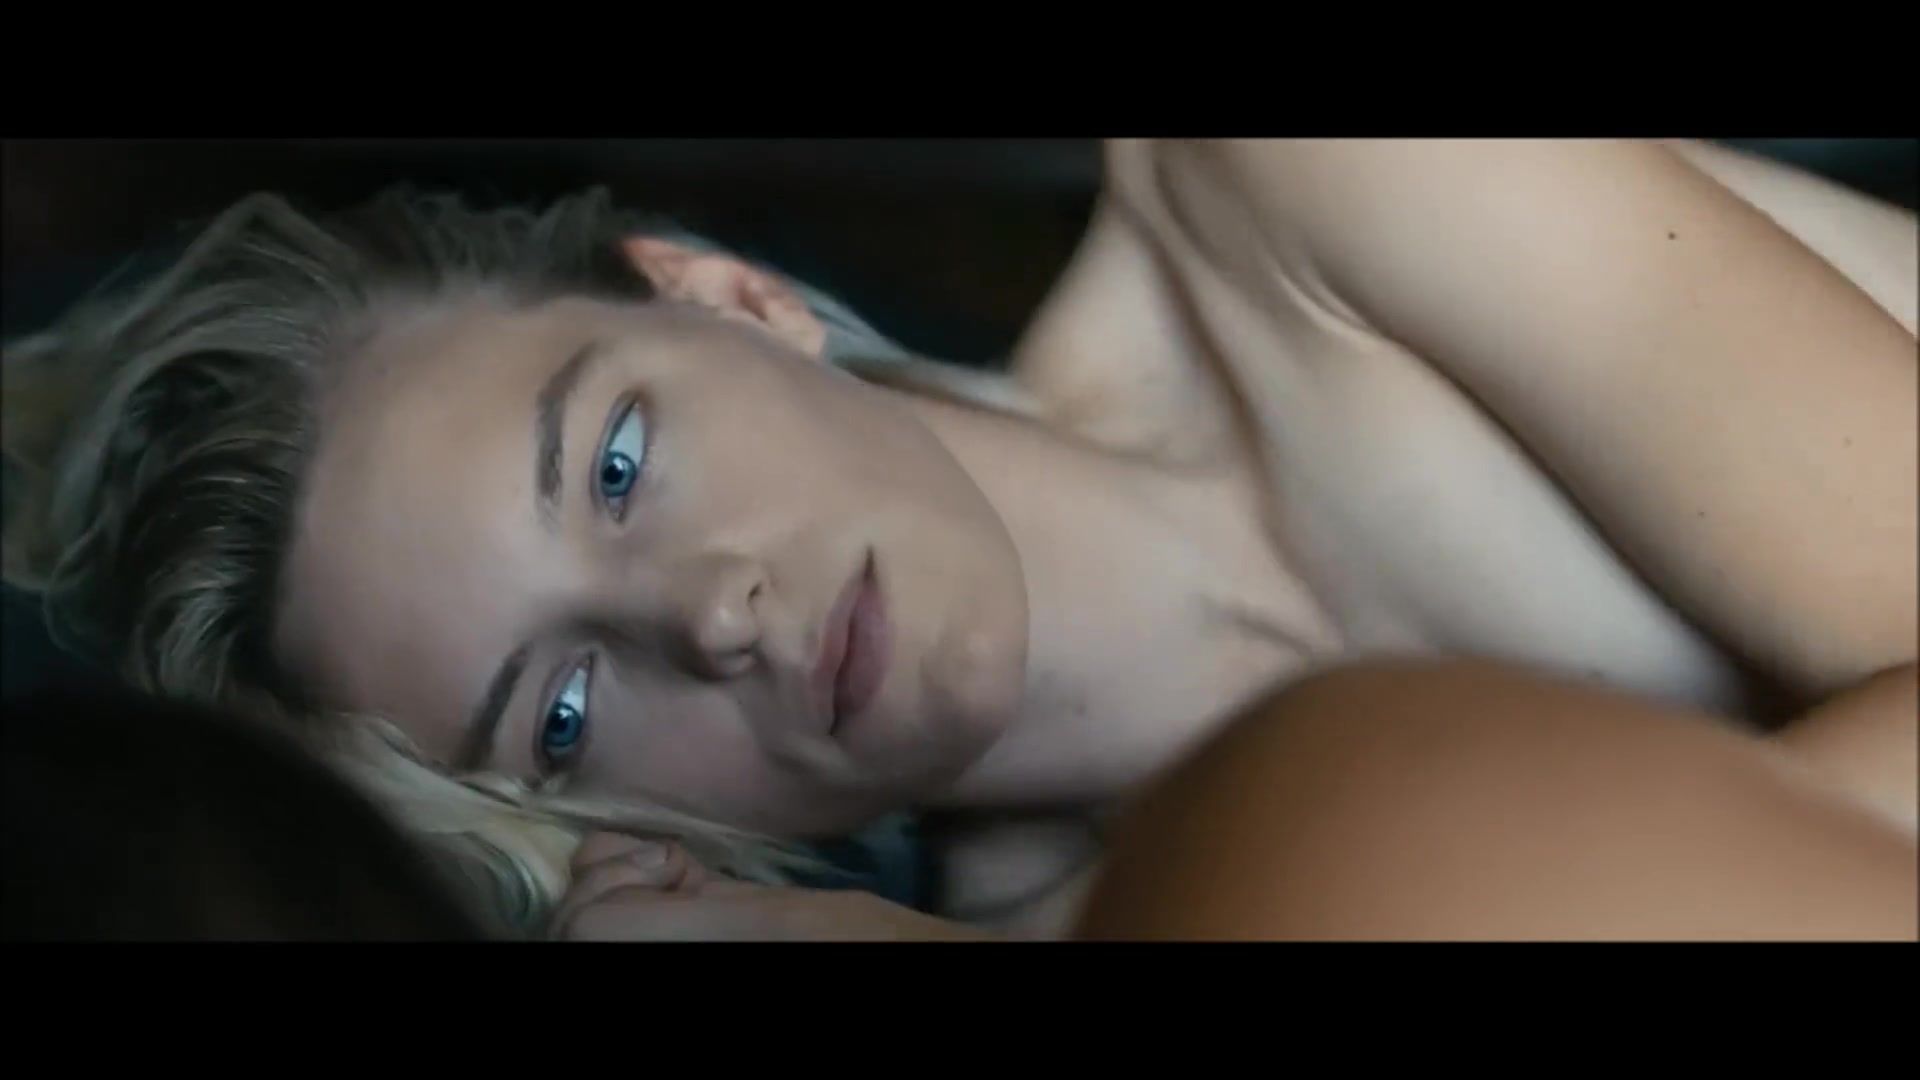 One Erika Linder and Natalie Krill rub snatches in lesbian sex scene from Below Her Mouth Sluts - 2